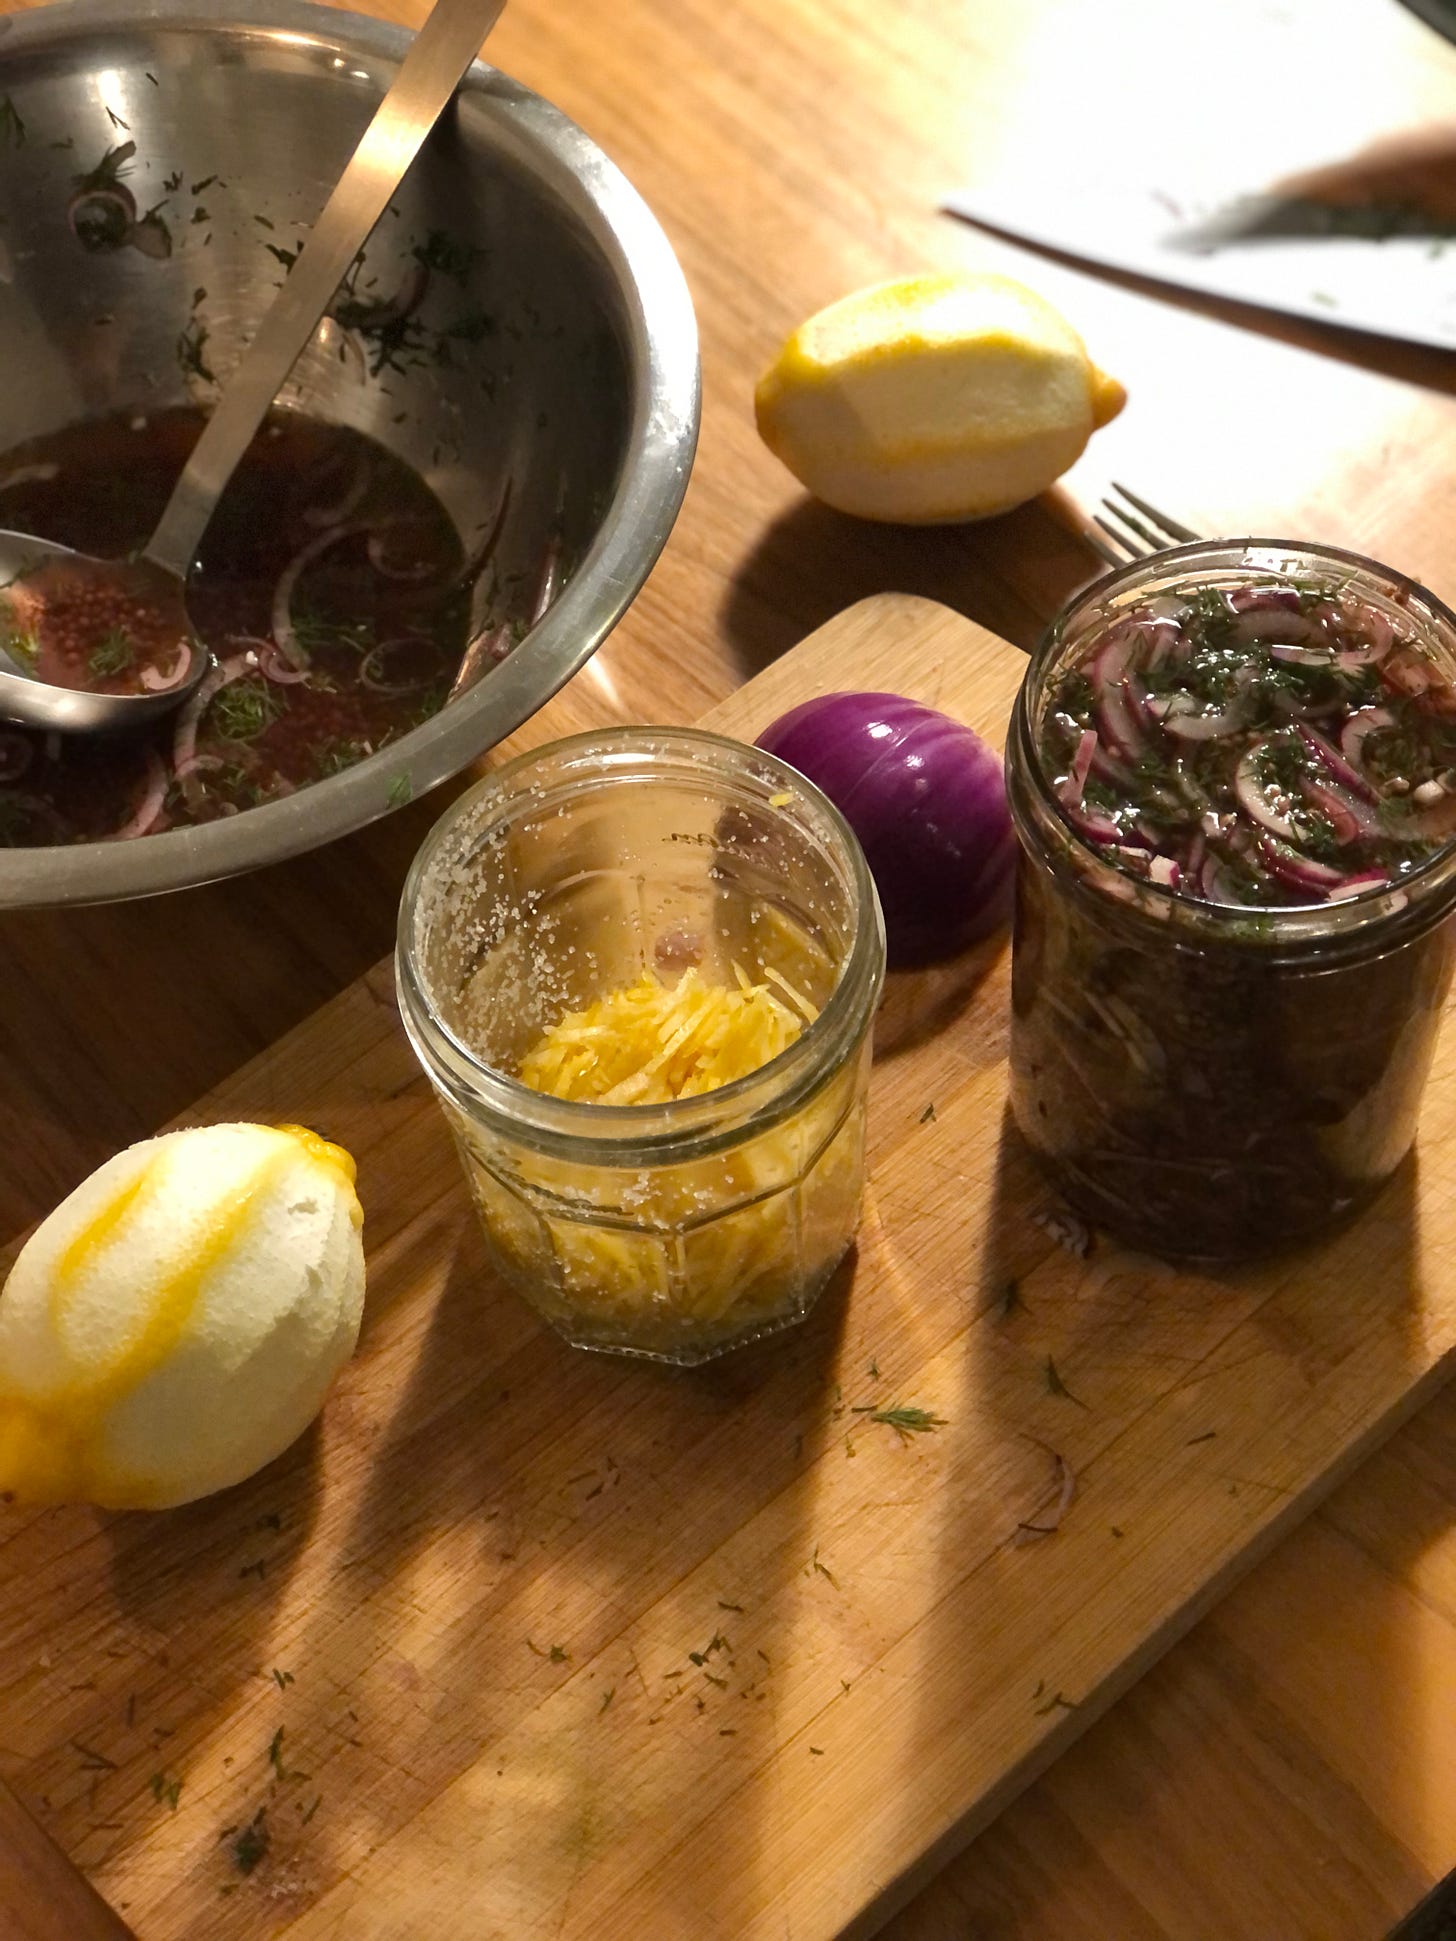 An angled overhead photo of a wooden table, clockwise from top left: a metal bowl with ladle and a pinky liquid with dill and onion slices; a lemon on its side with rind peeled off; on a wooden chopping board with a full jar of red onion slices in liquid, half a red onion, another glass jar half full with pieces of rind, another lemon.